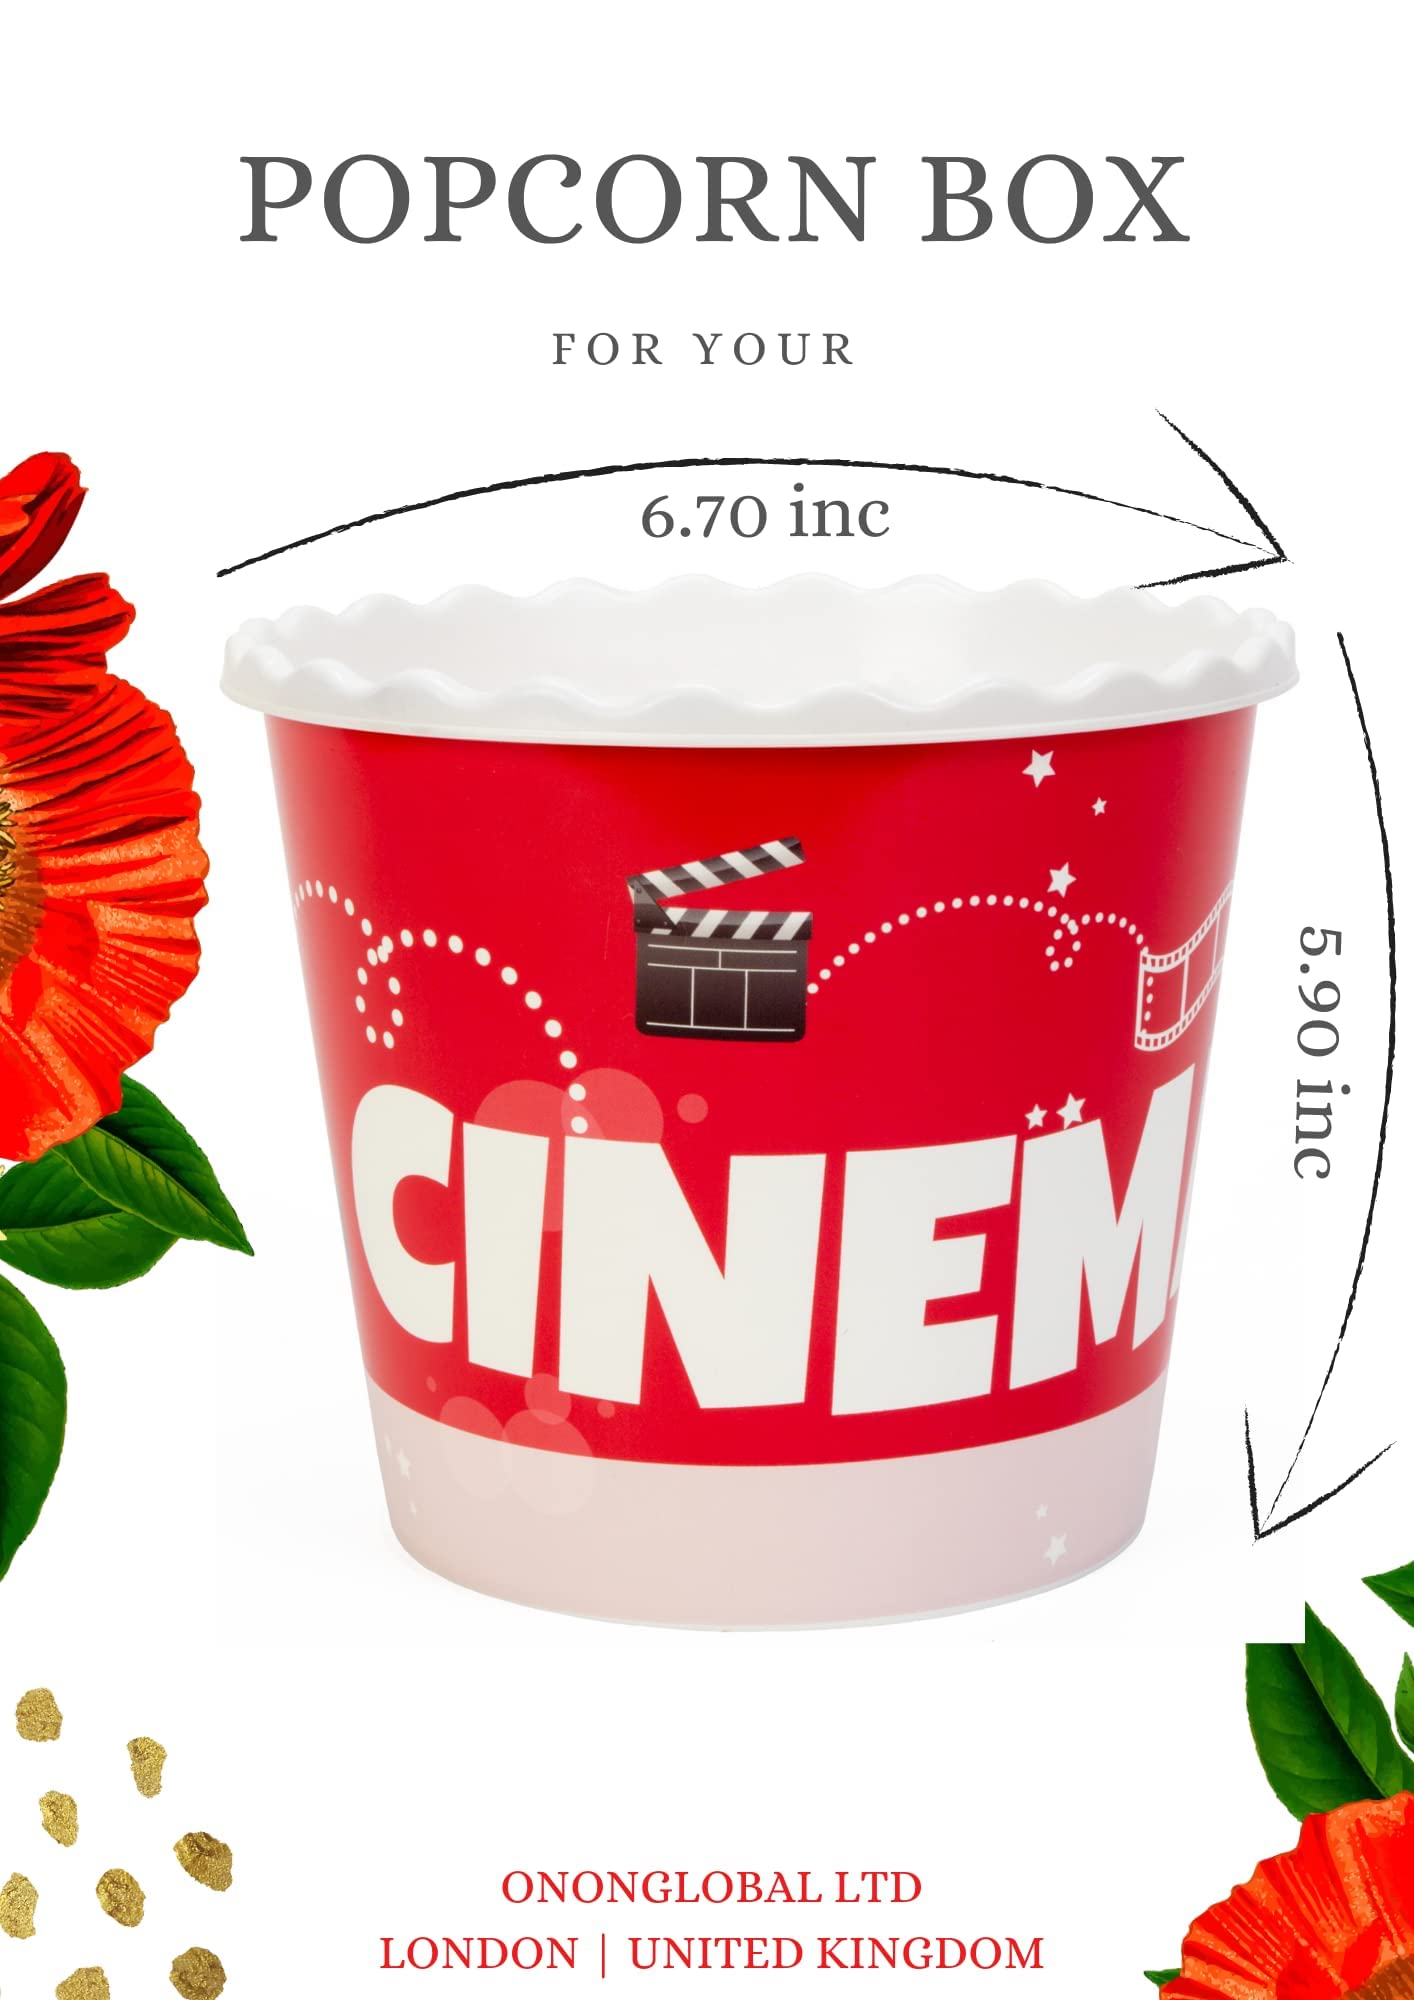 ONONGLOBAL LTD Retro Style Reusable Plastic Popcorn Containers/Popcorn Bowls Set for Movie Theater Night - Washable in The Dishwasher - (BPA Fr